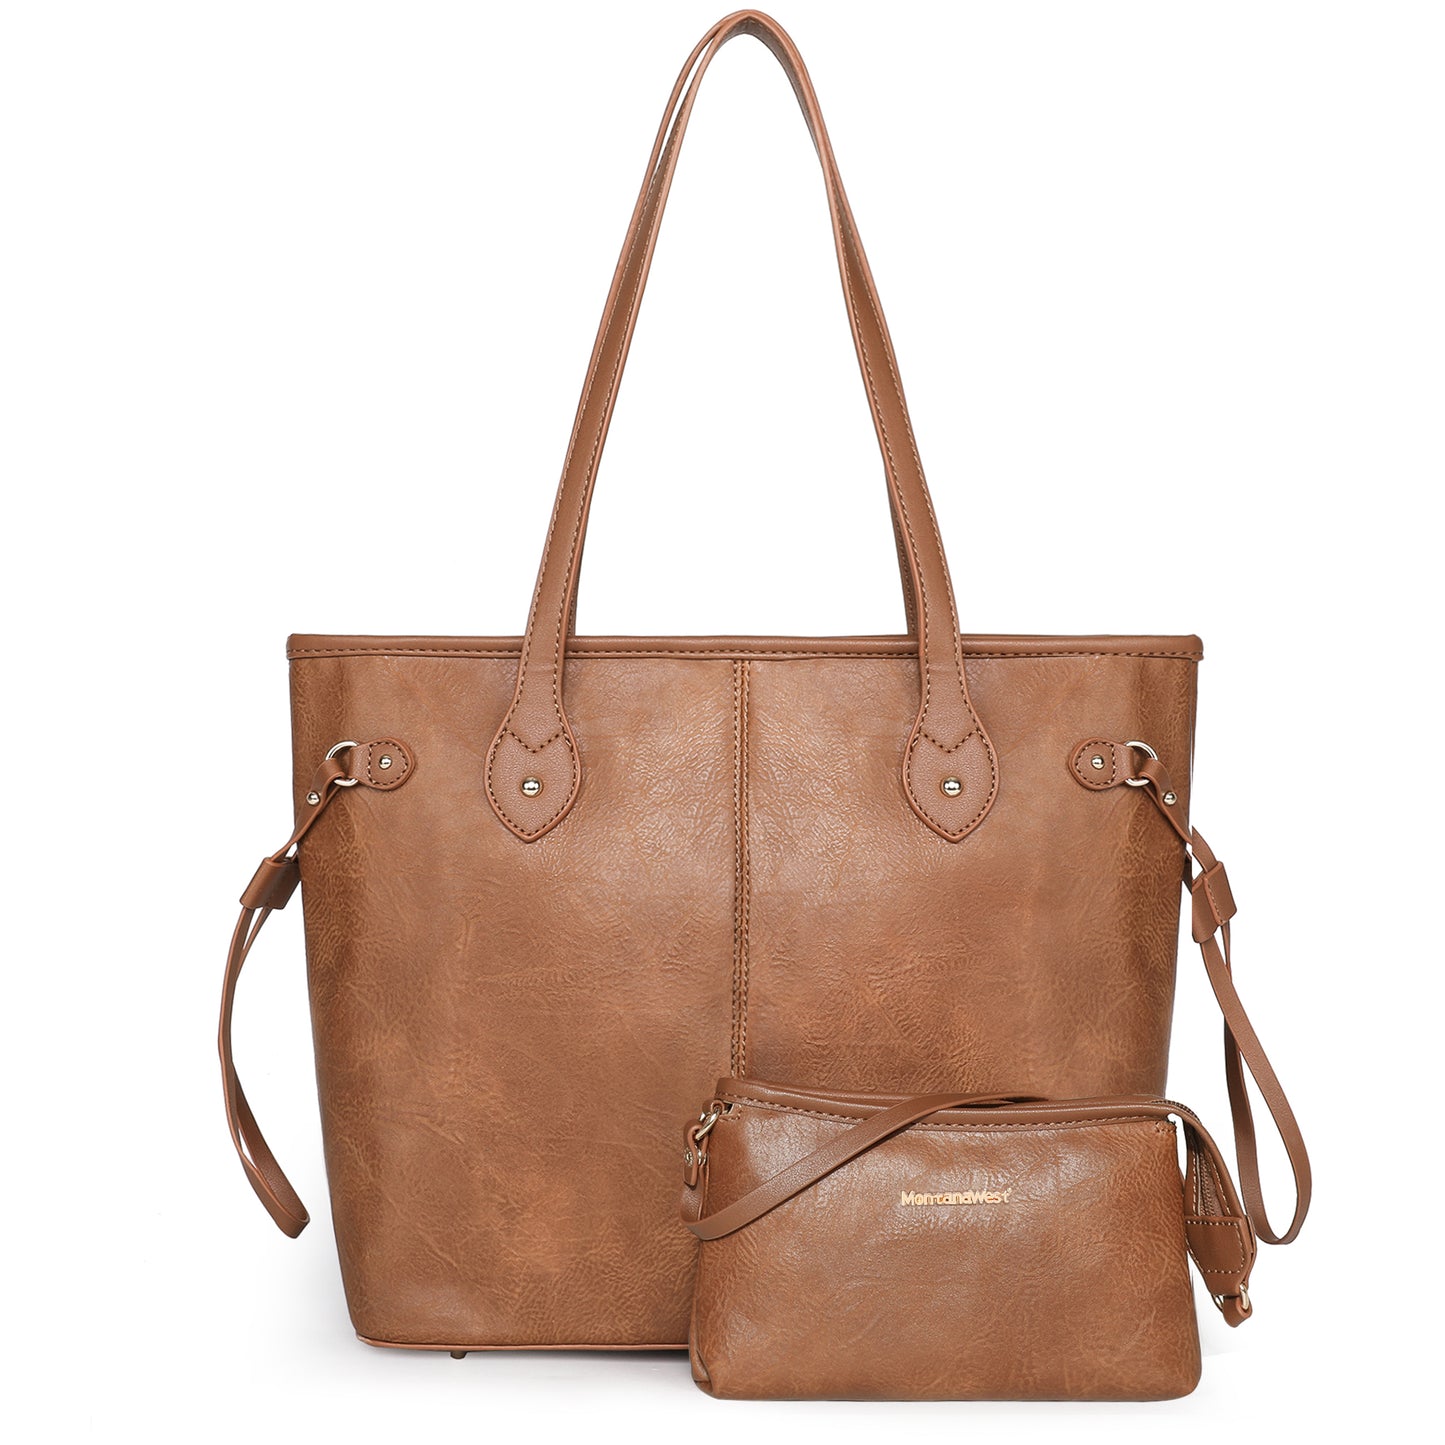 Montana West Tote Bag Vegan Leather Purses and Handbags for Women